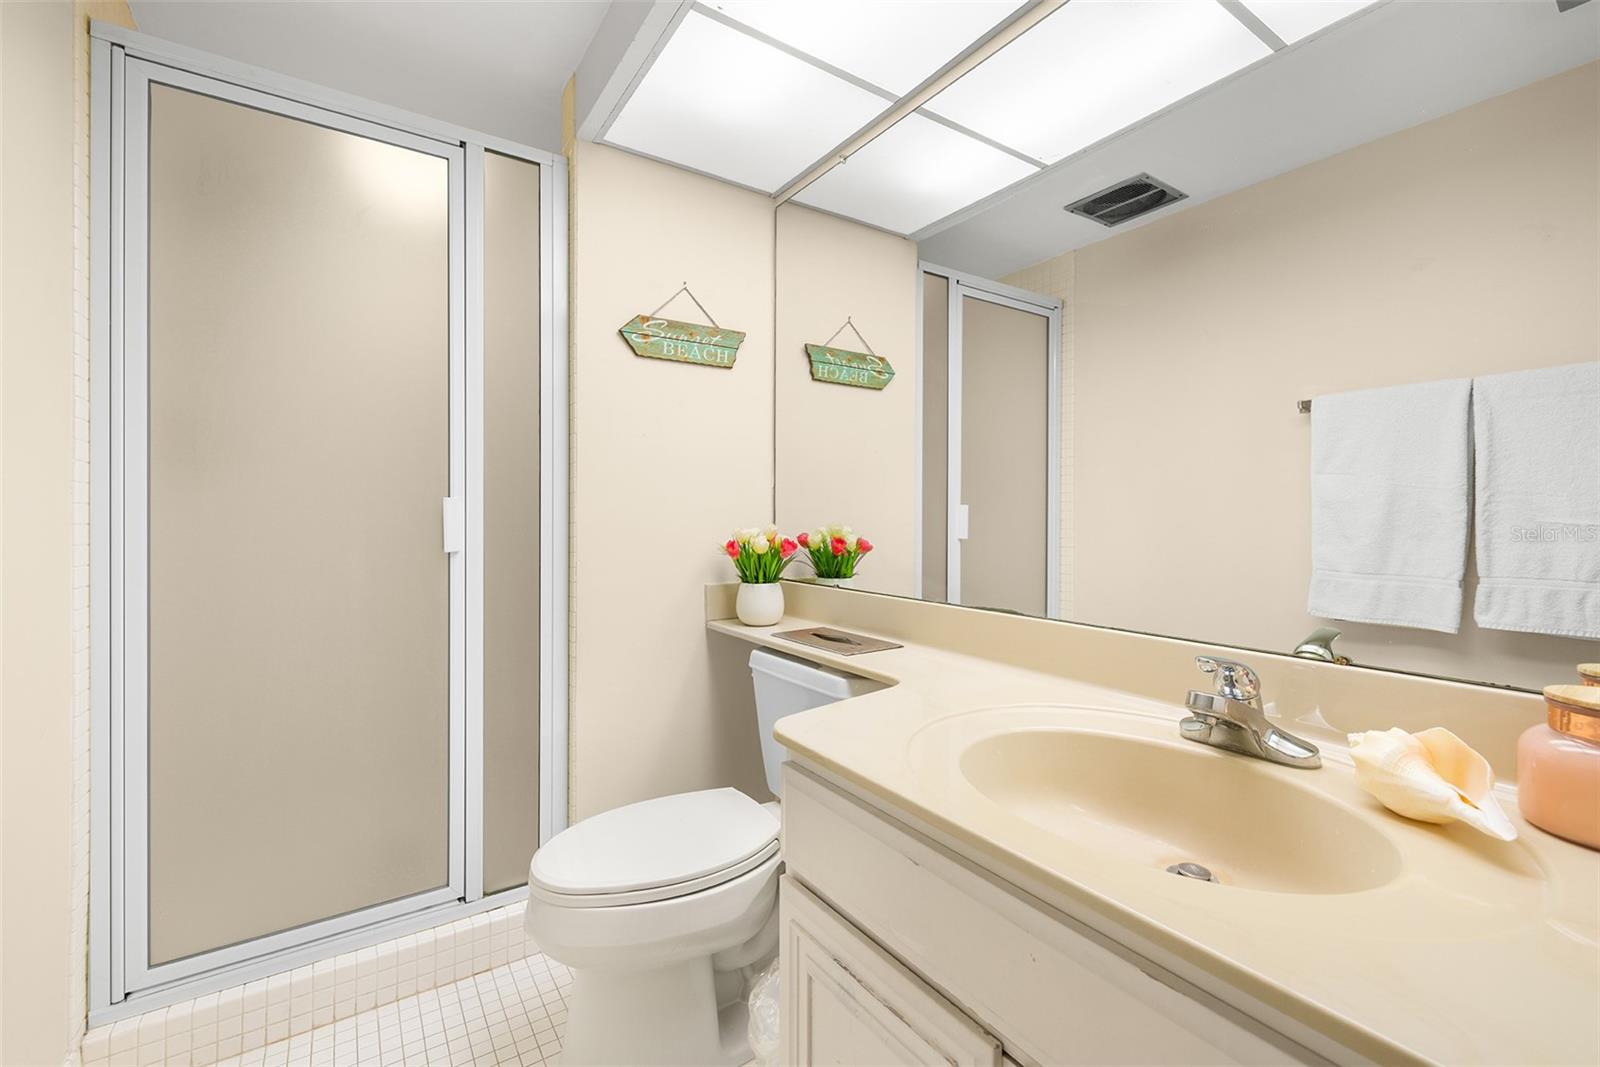 The second bath has a walk-in shower for ease.